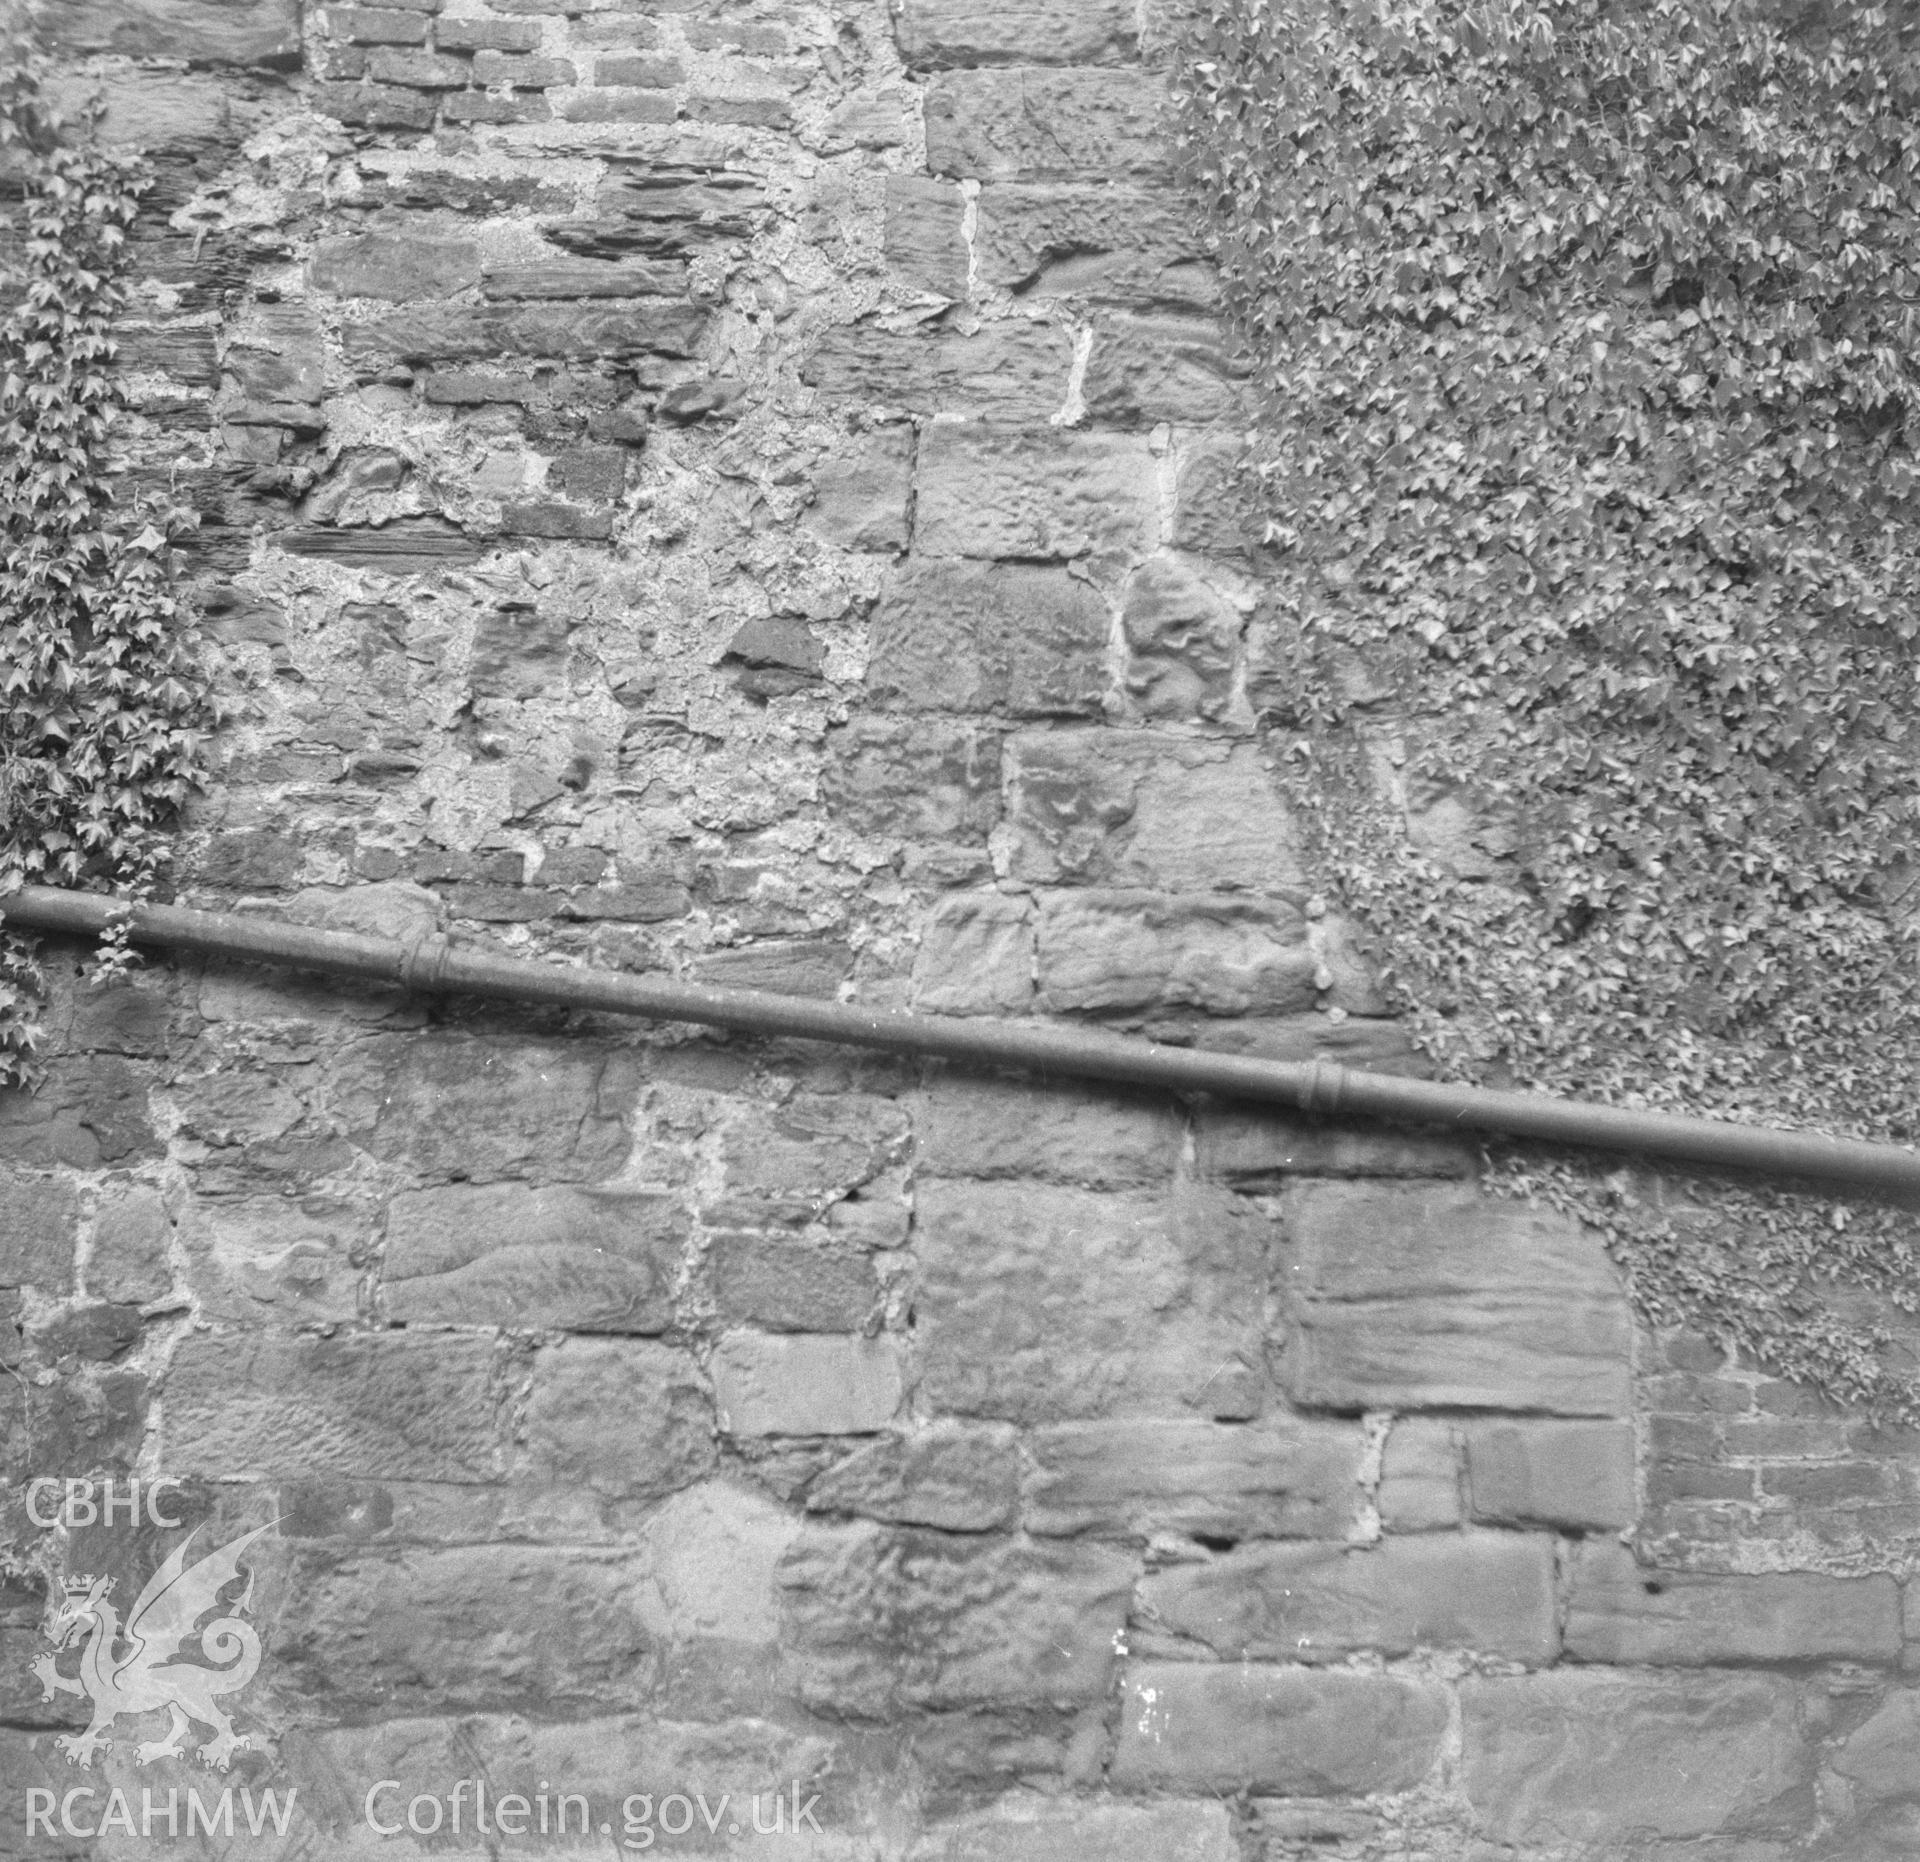 Digital copy of a black and white nitrate negative, showing exterior detail of stonework at Llyseurgain, Northop.